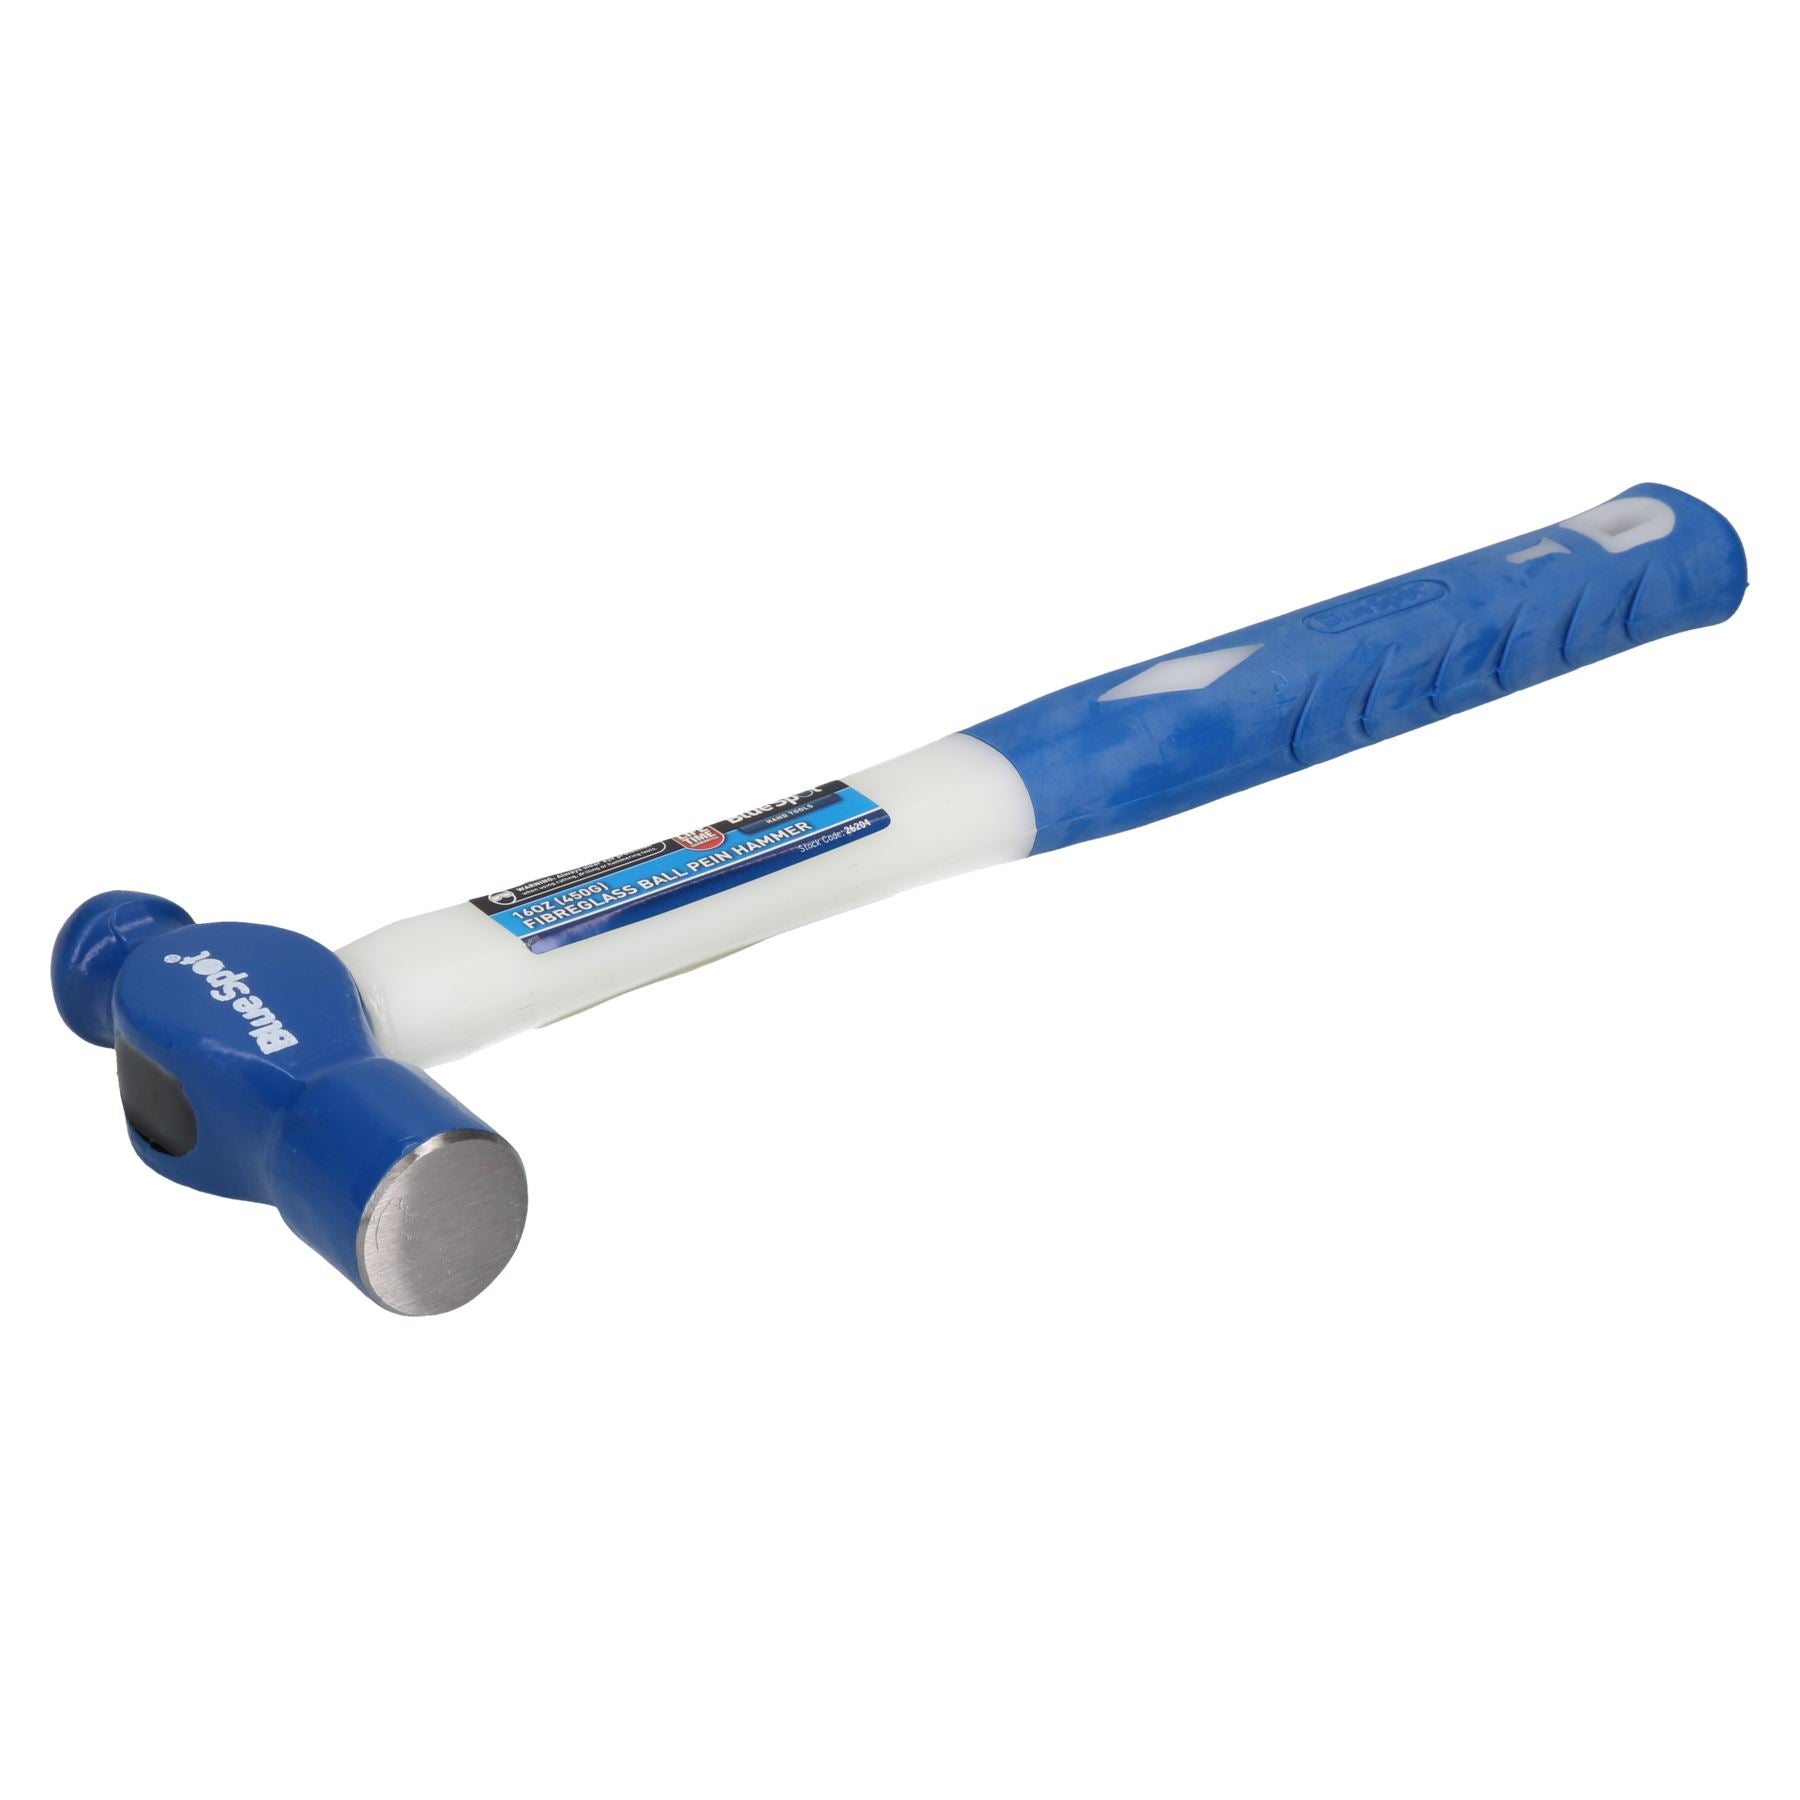 16oz (450g) Ball Pein Hammer with Fibreglass Shaft and TPR Rubberised Handle